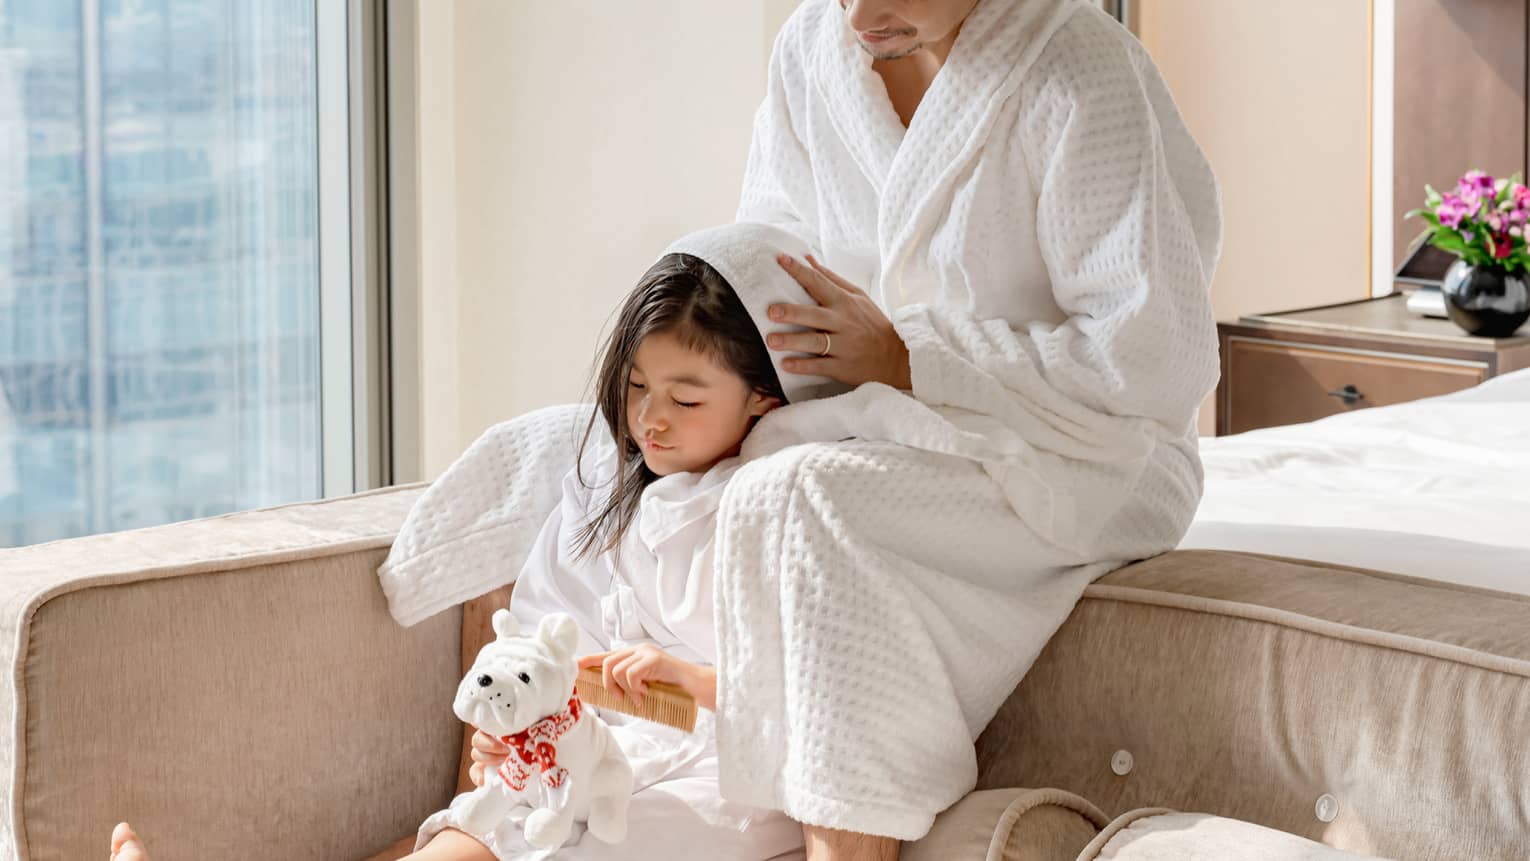 Mom and daughter in white robes sit on end-of-bed bench in guest room, girl holding stuffed dog as mom dries her hair with a towel